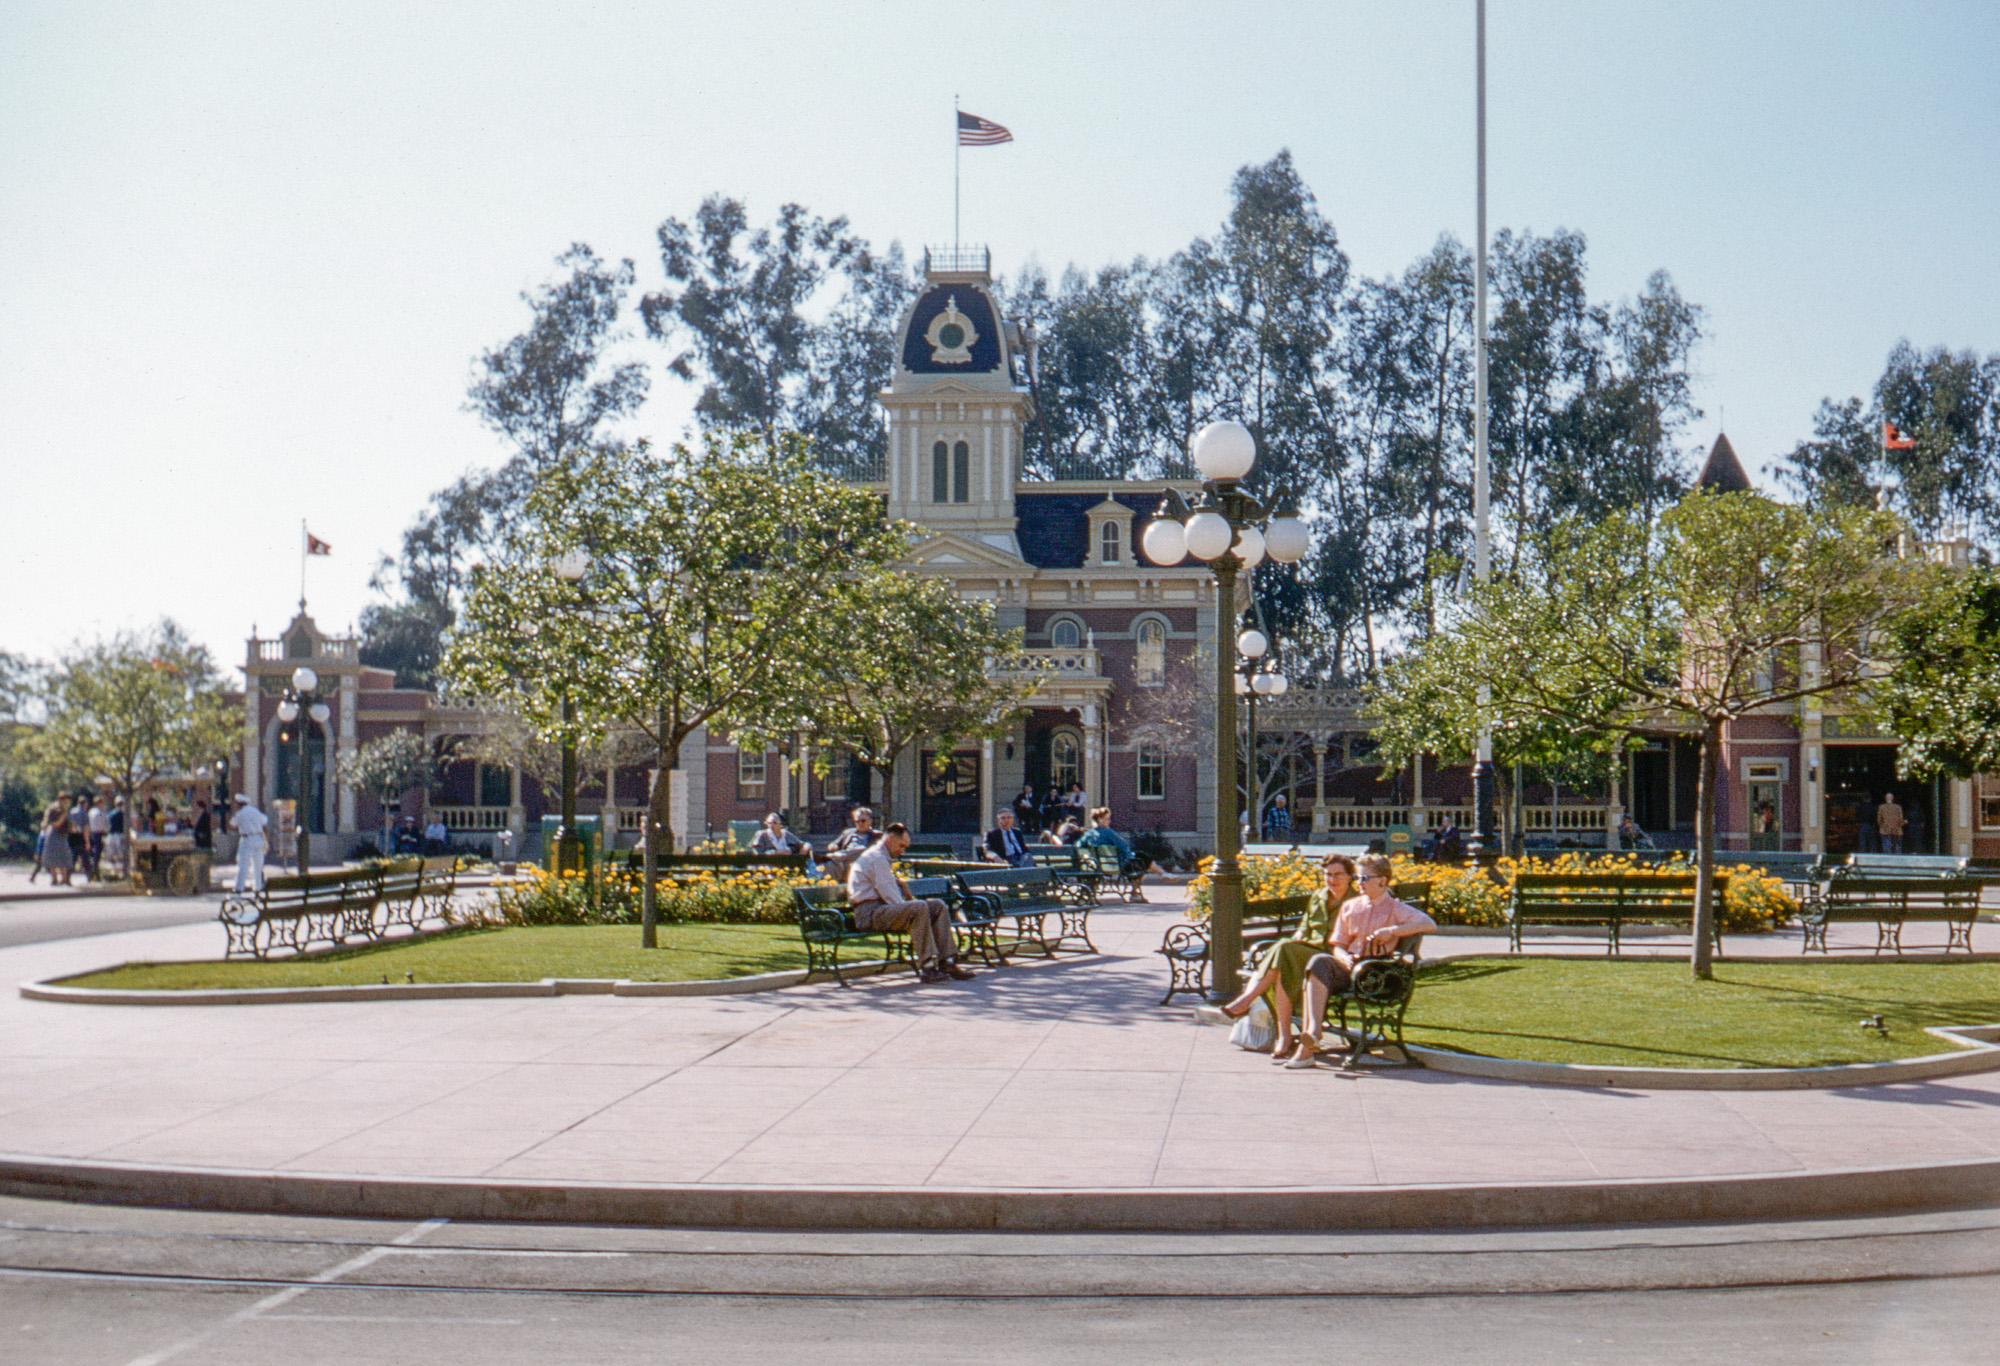 This tranquil scene, much less the sight of people in suits, ties, earrings and heels, may have today's frazzled visitors questioning if this is actually the Magic Kingdom. Nevertheless, my brother-in-law took this Kodachrome slide there in February 1958. View full size.